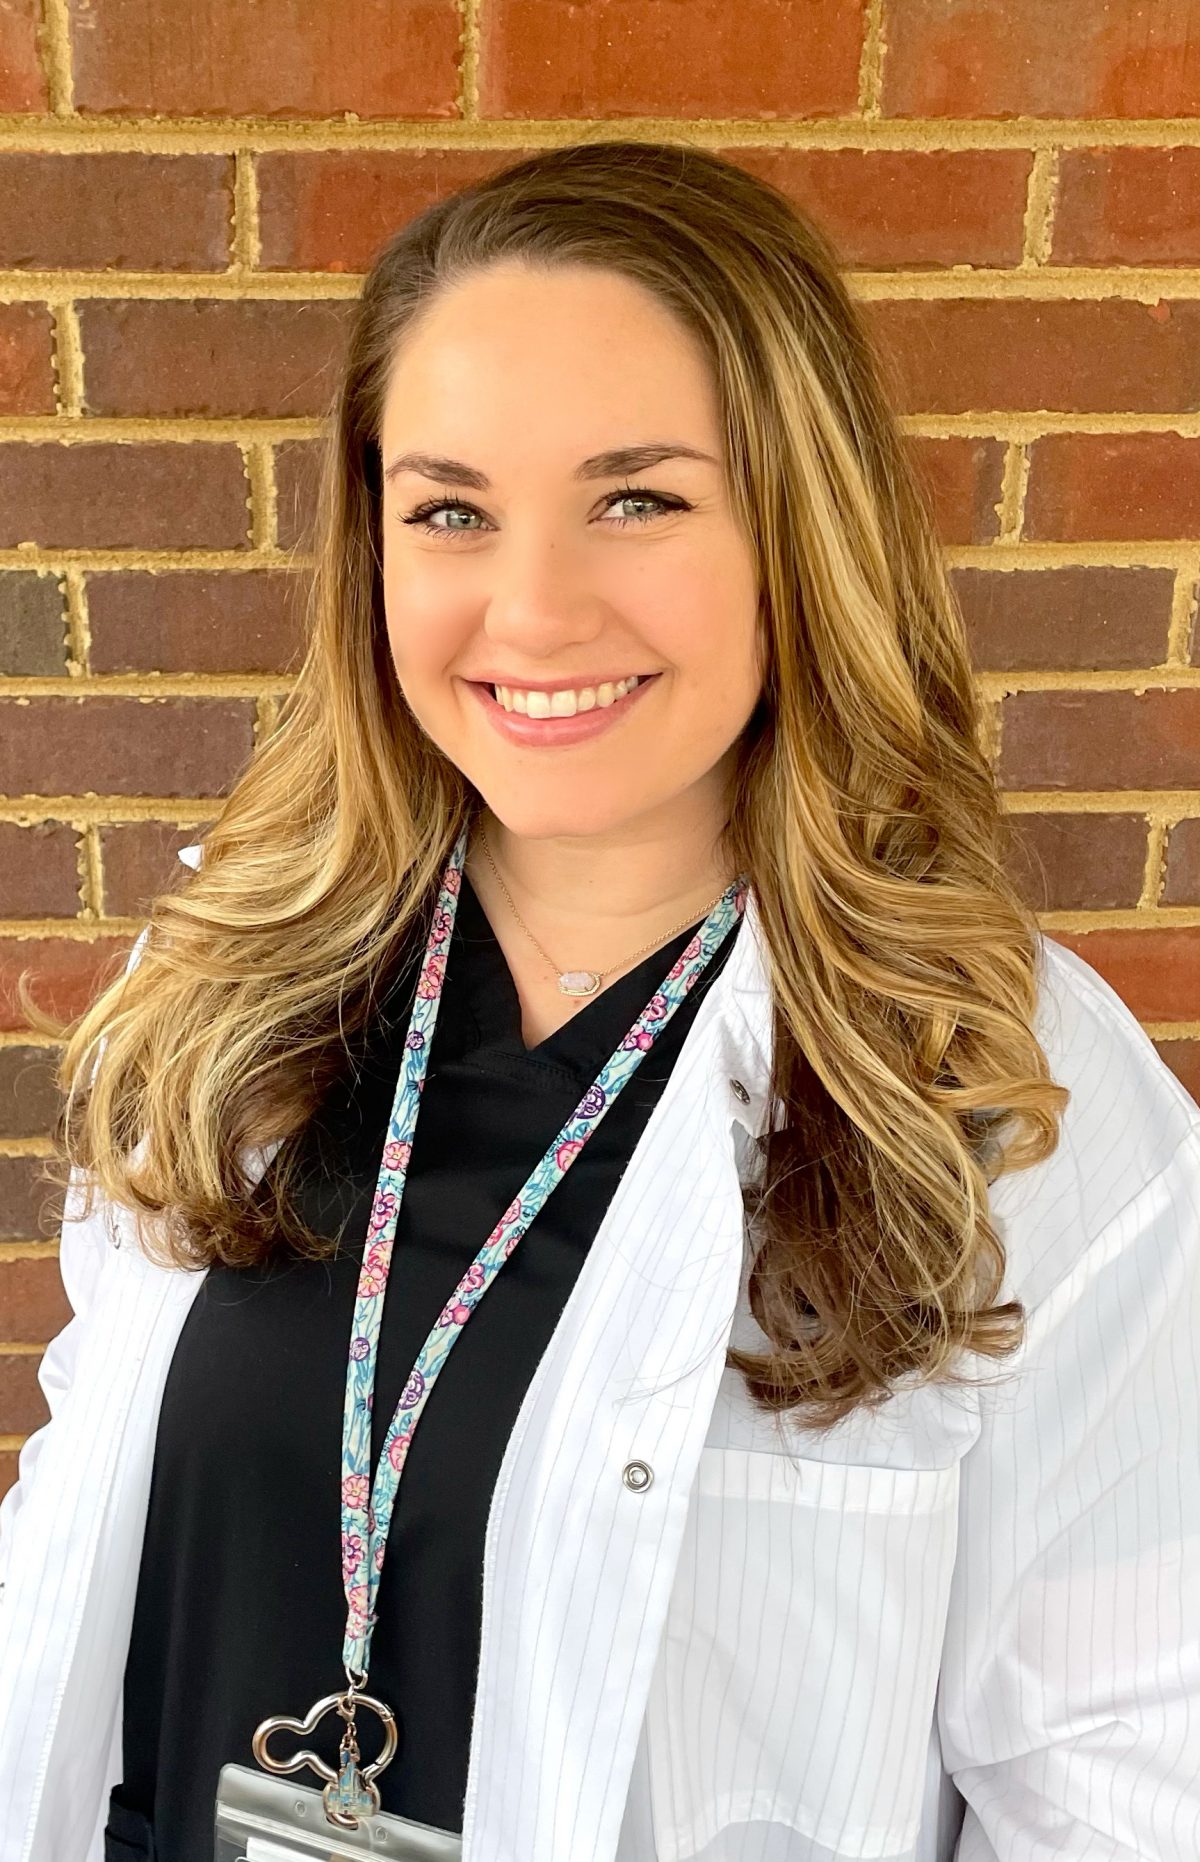 As a microbiologist with the Alabama Department of Public Health, (ADPH) Faulkner alumna Hannah Putman is working to combat illnesses and make a positive difference in people's lives. 